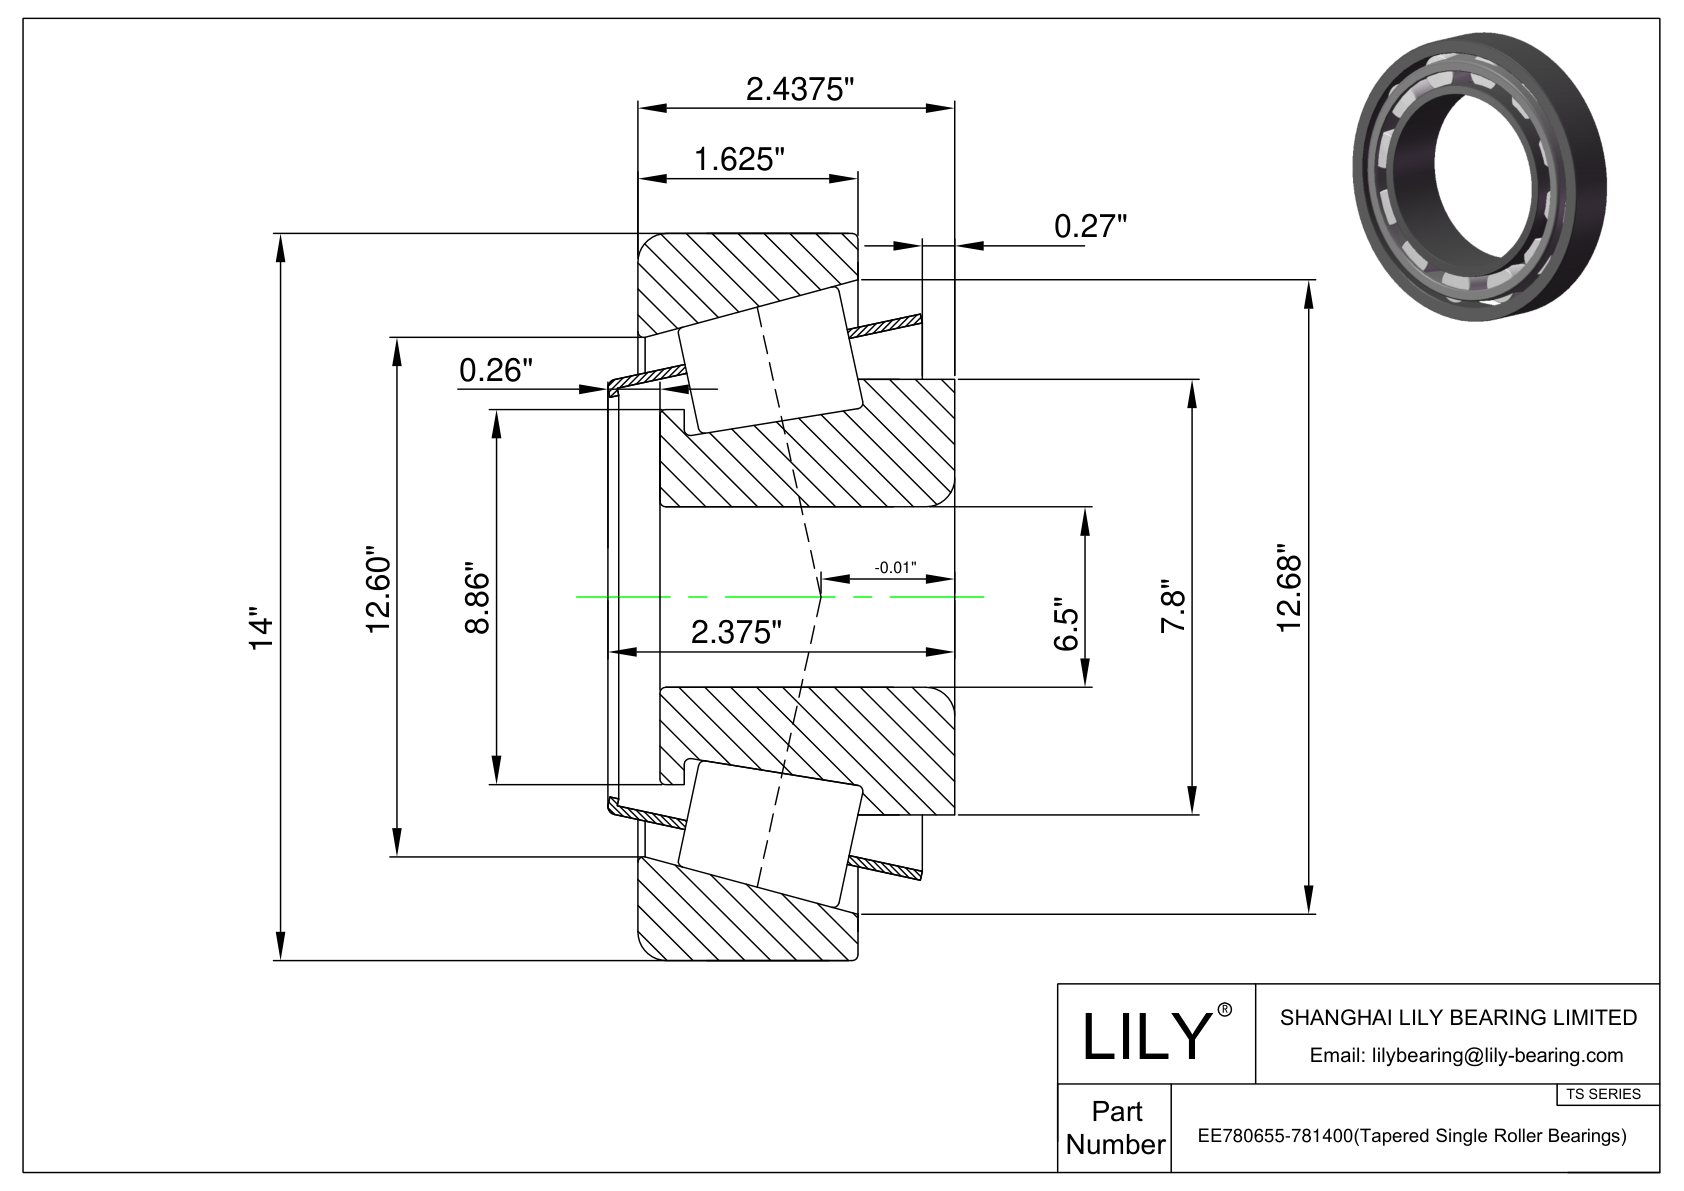 EE780655-781400 TS (Tapered Single Roller Bearings) (Imperial) cad drawing